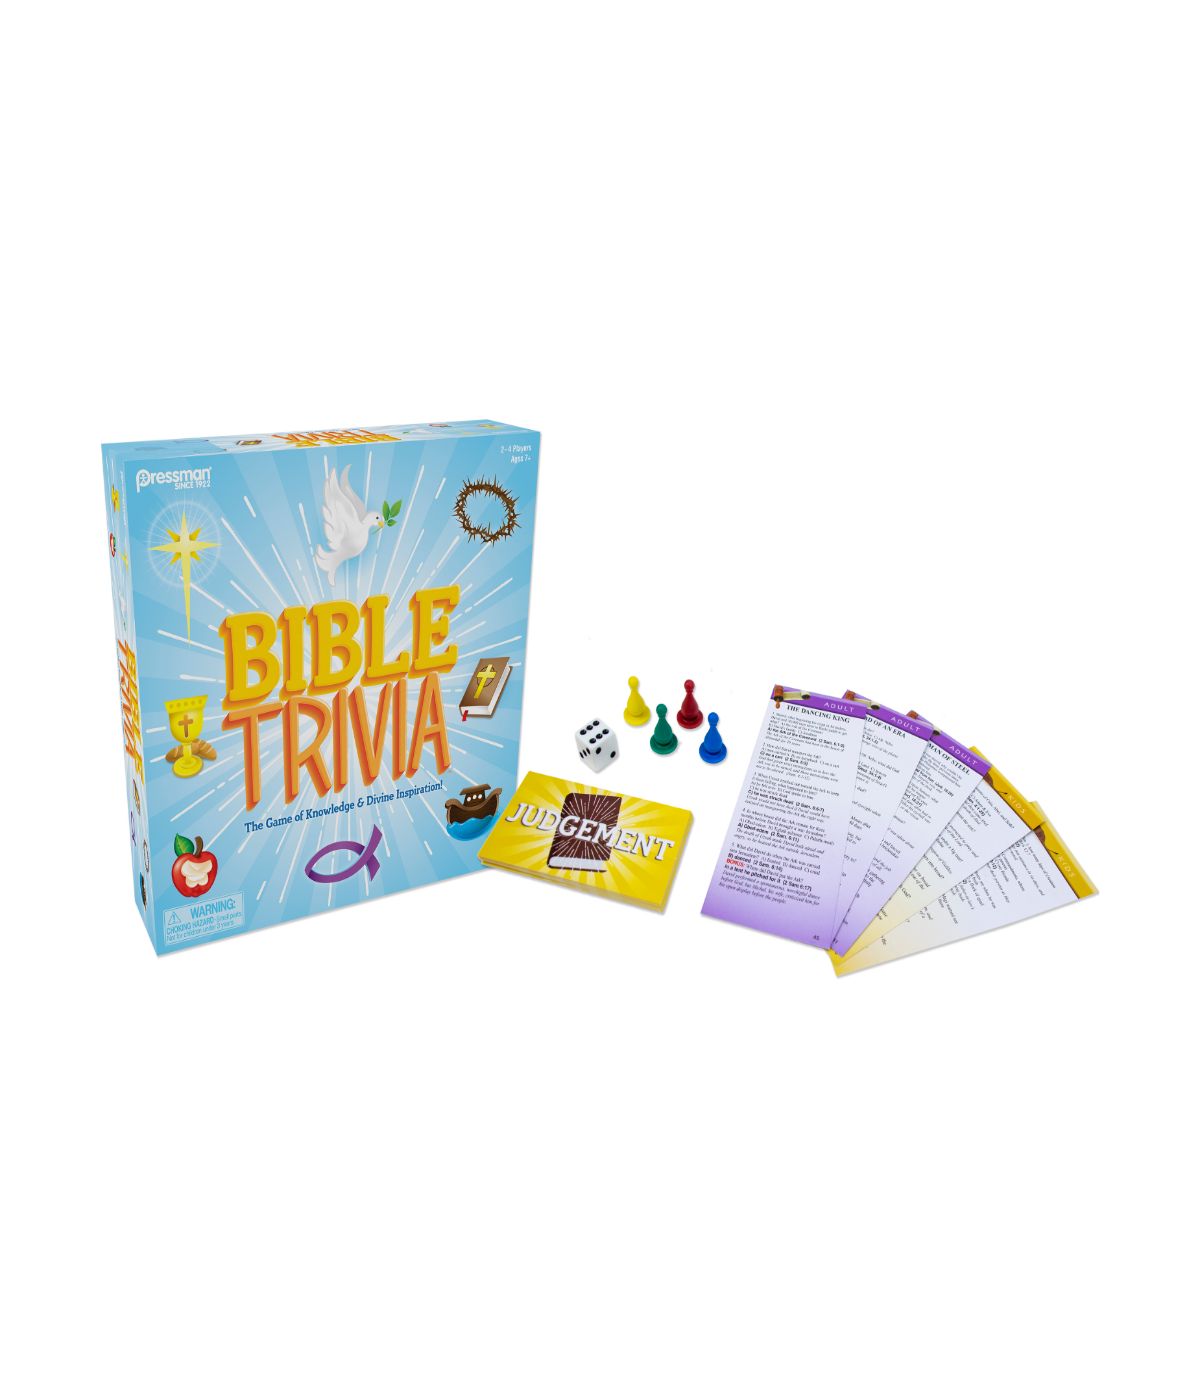 Bible Trivia - The Game of Knowledge & Divine Inspiration! Multi